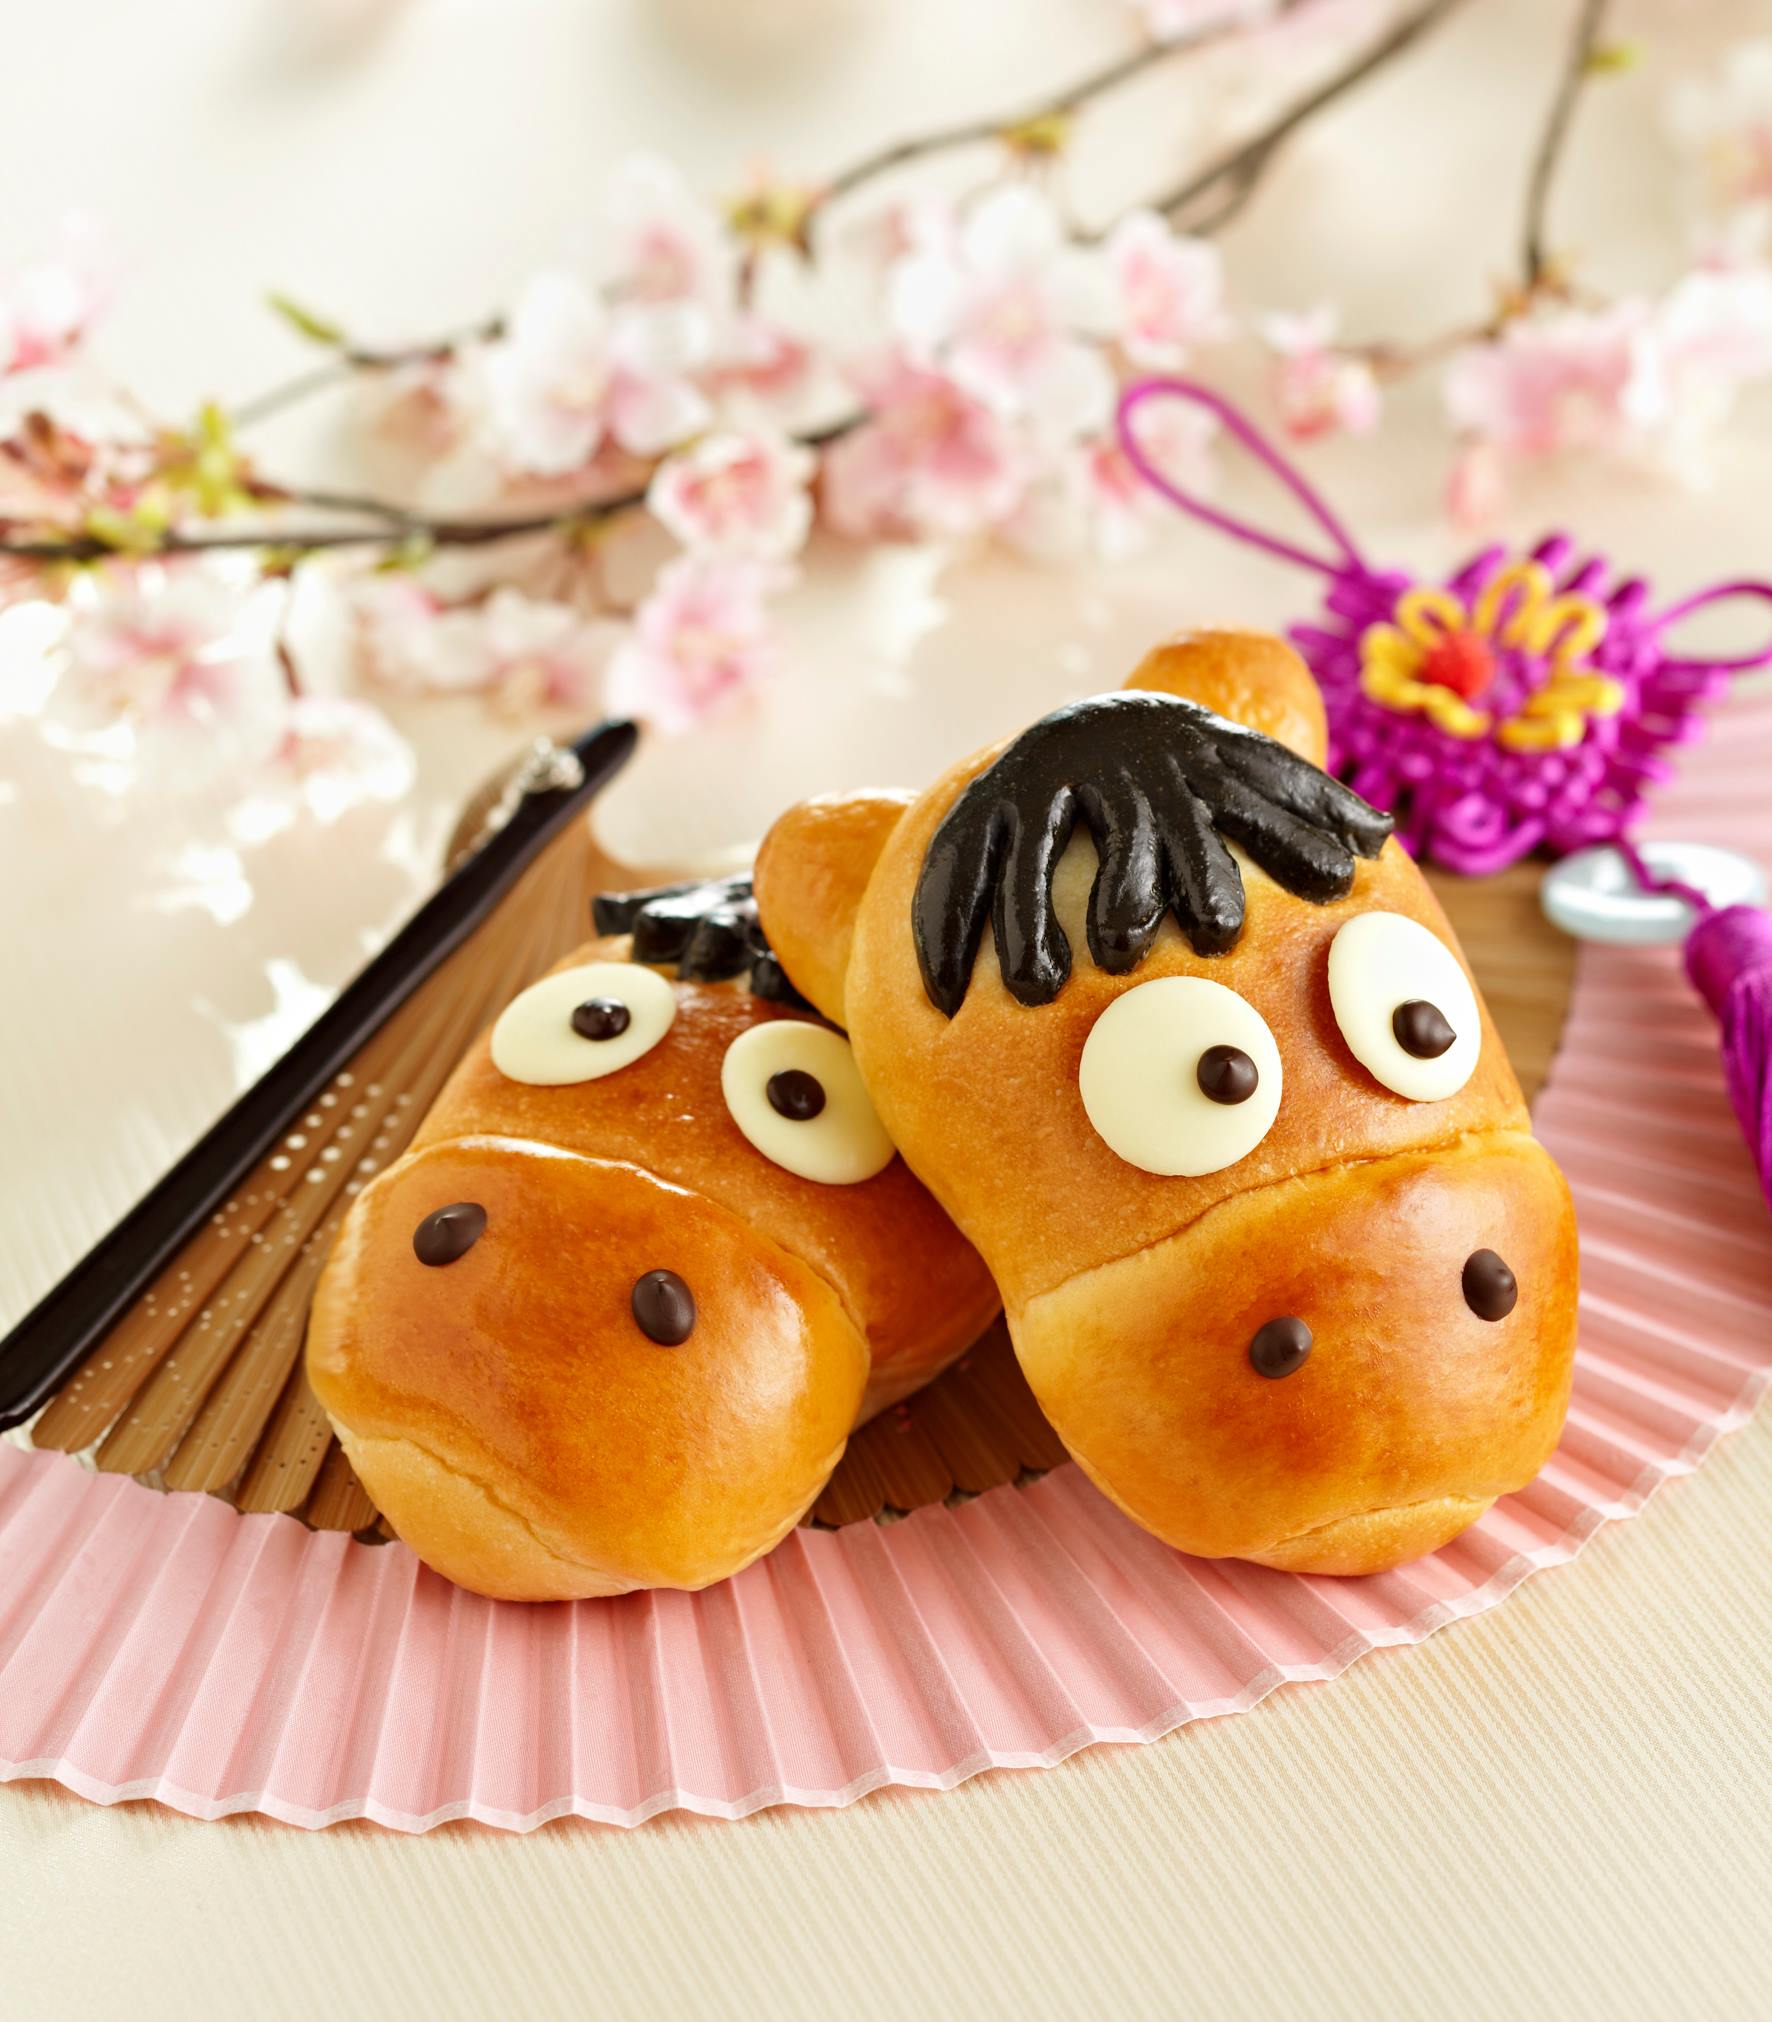 Chinese New Year Horseperity bun from BreadTalk